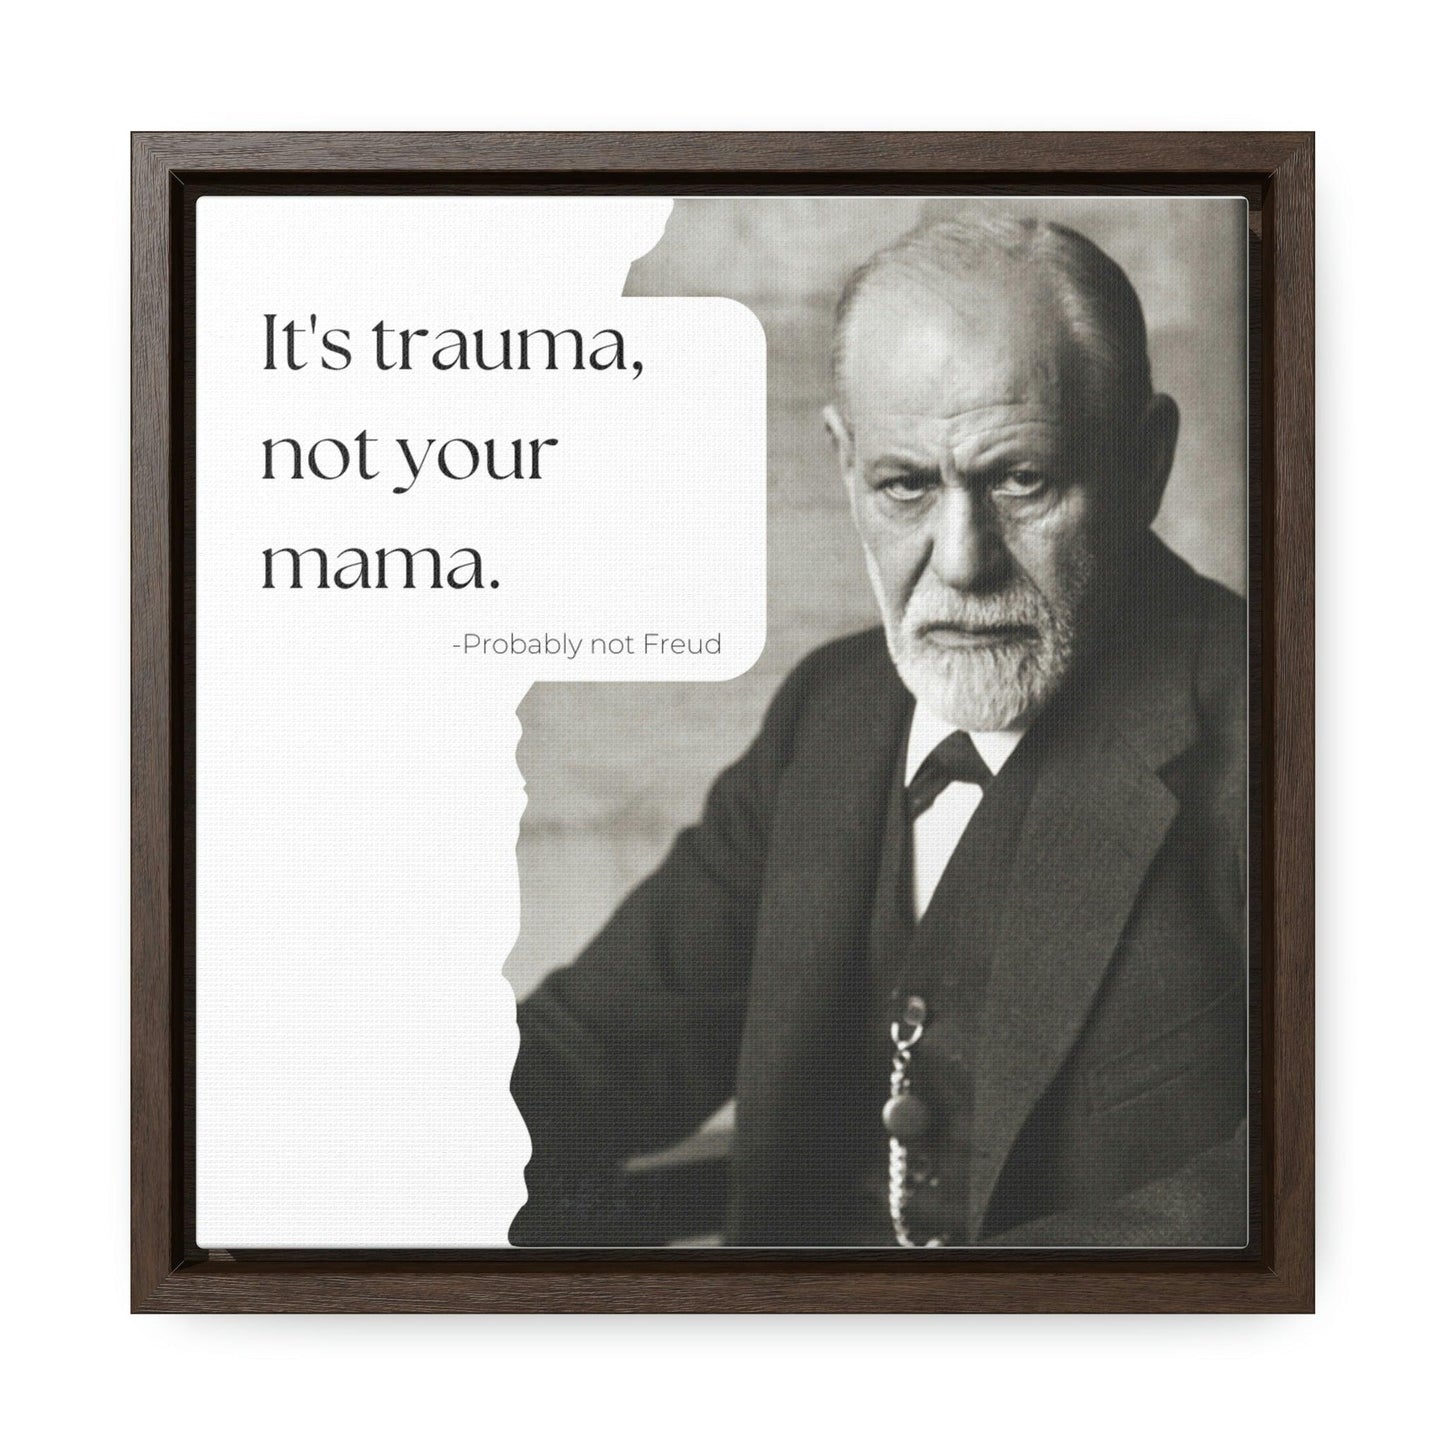 It's trauma, not your mama - Gallery Canvas Wraps, Square Frame - Moxie Graphics